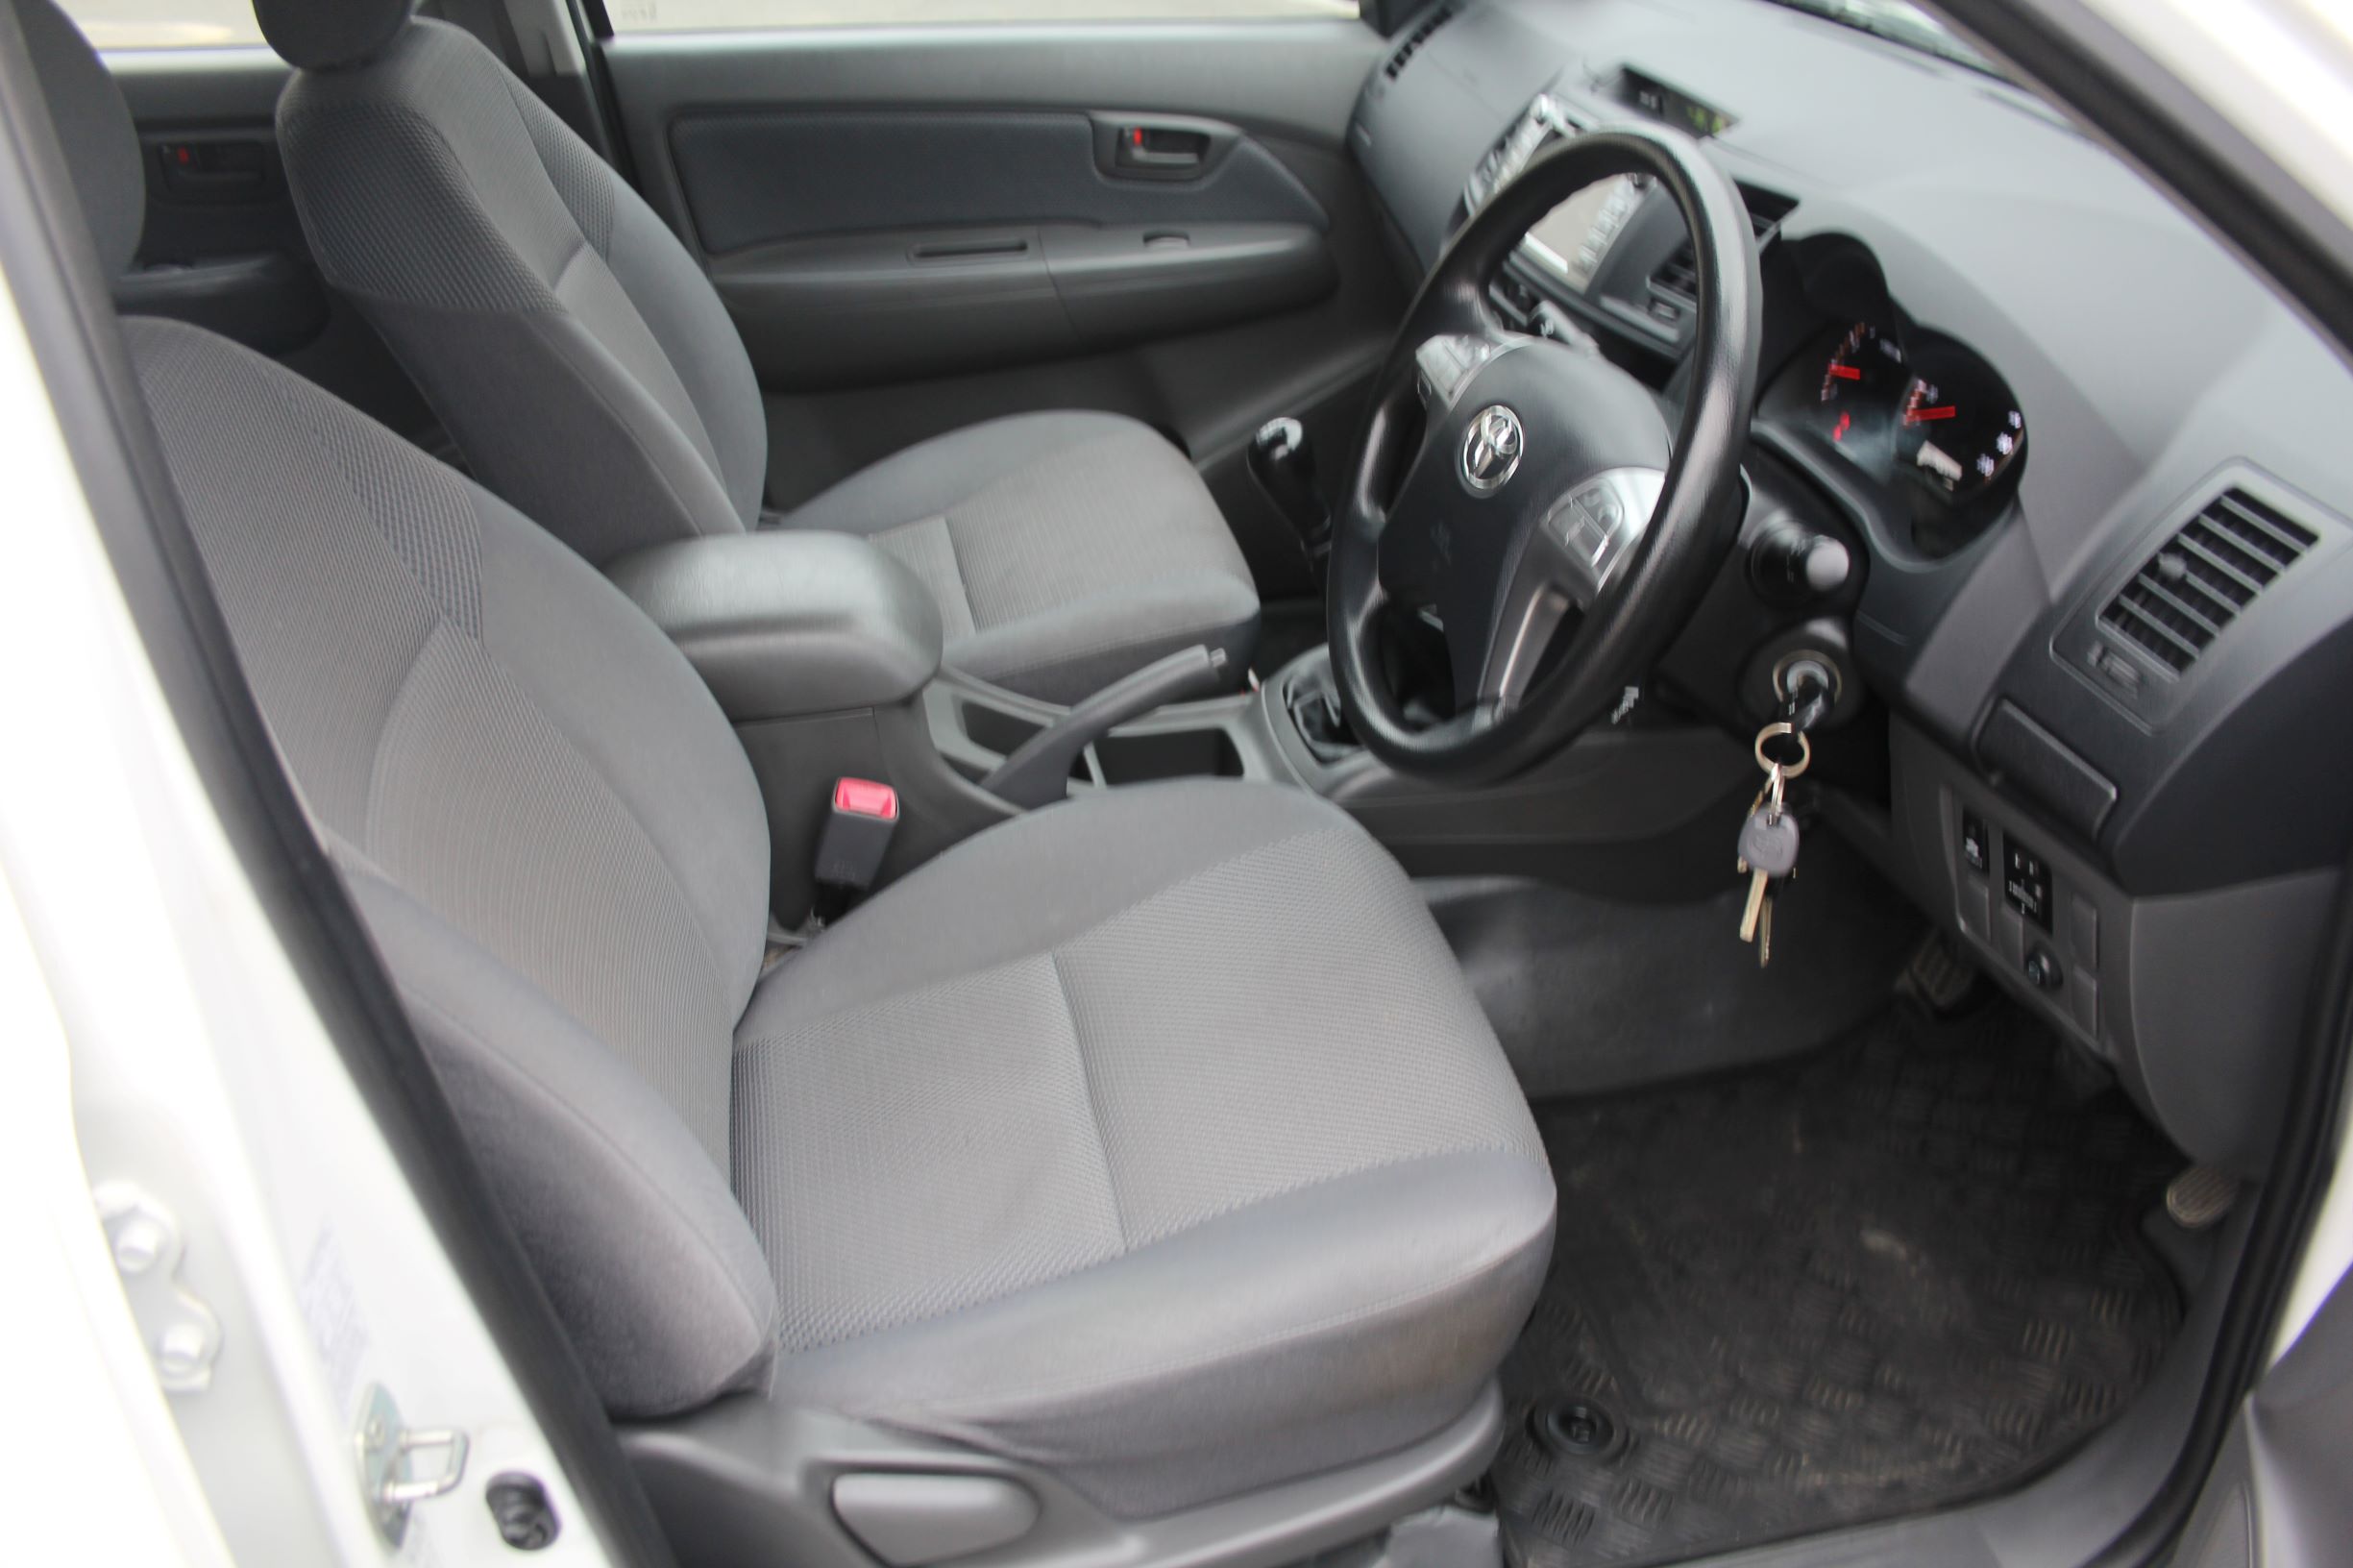 Toyota Hilux 2wd  2015 for sale in Auckland